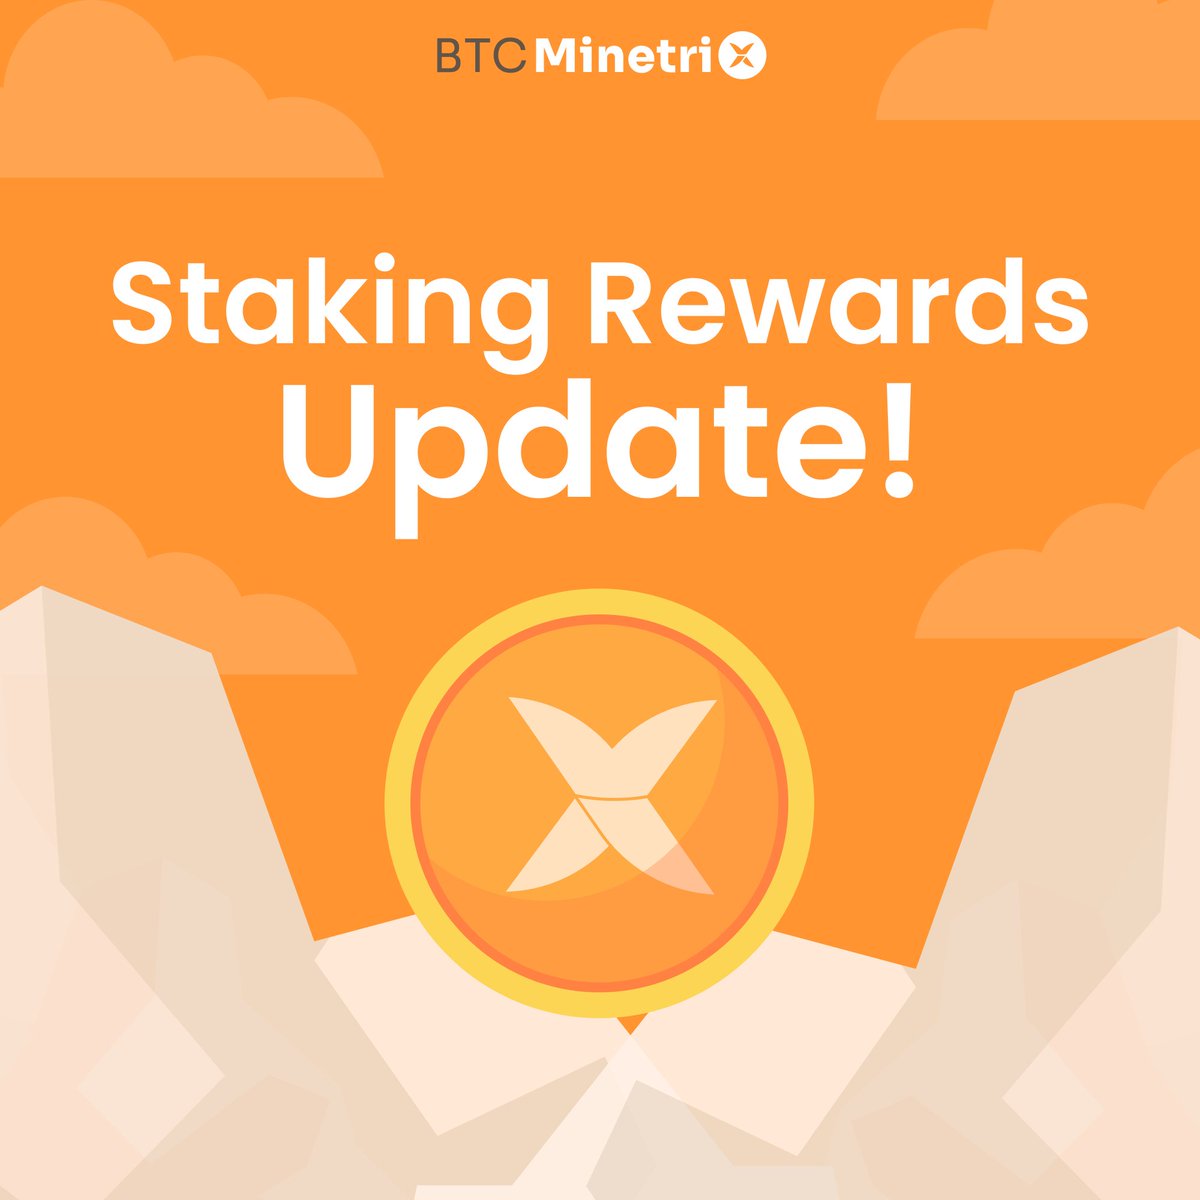 #BTCMTX Staking Rewards Update! 🔒 For users who bought #Tokens and staked in our Staking Contract - these $BTCMTX can now be claimed. Staking rewards are claimable alongside the initial token claim. Make sure to claim them through the 'Stake to Mine' dashboard on our website,